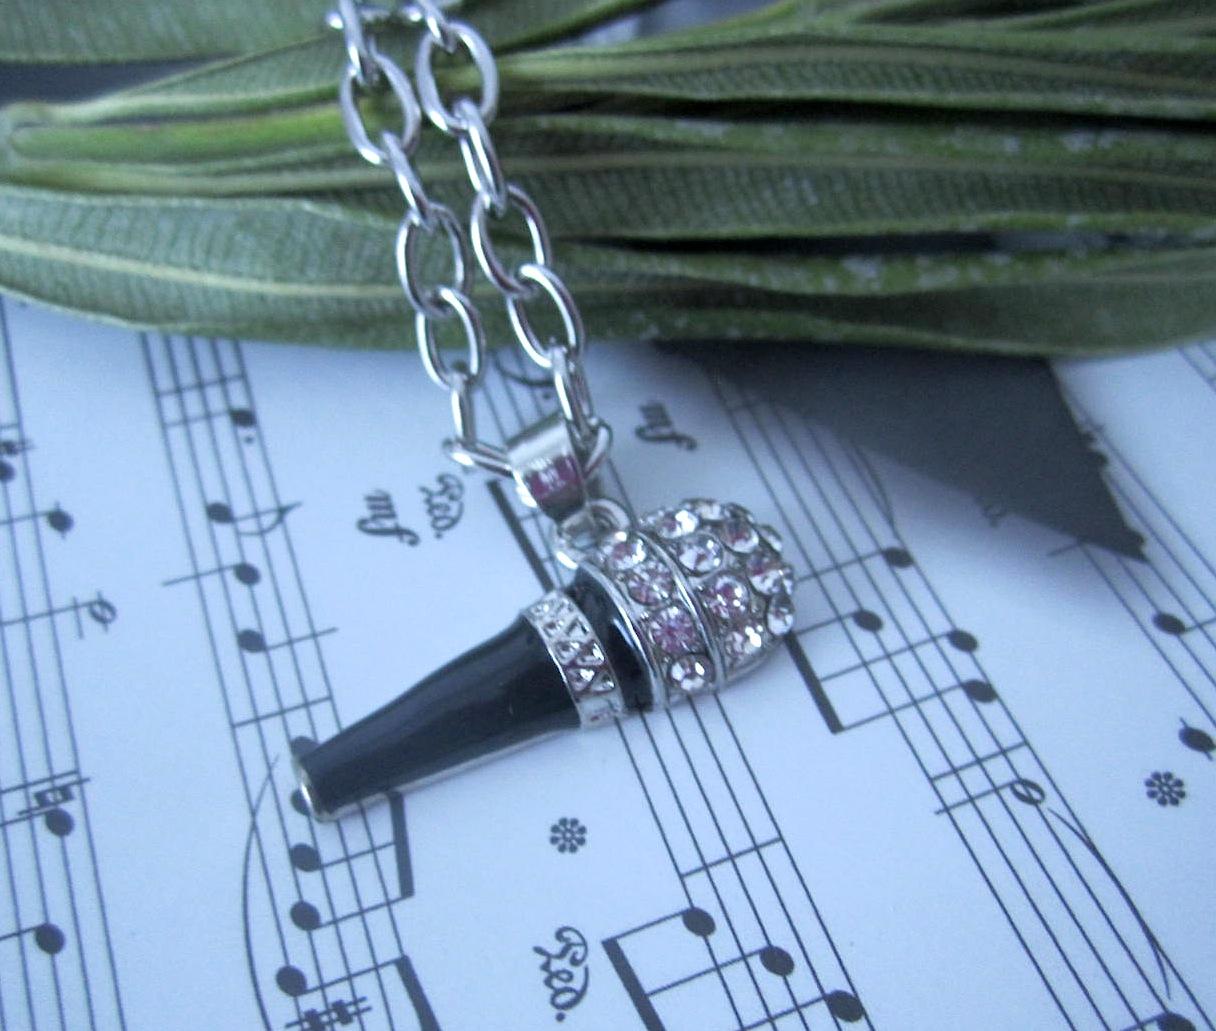 Microphone Necklace with Crystals